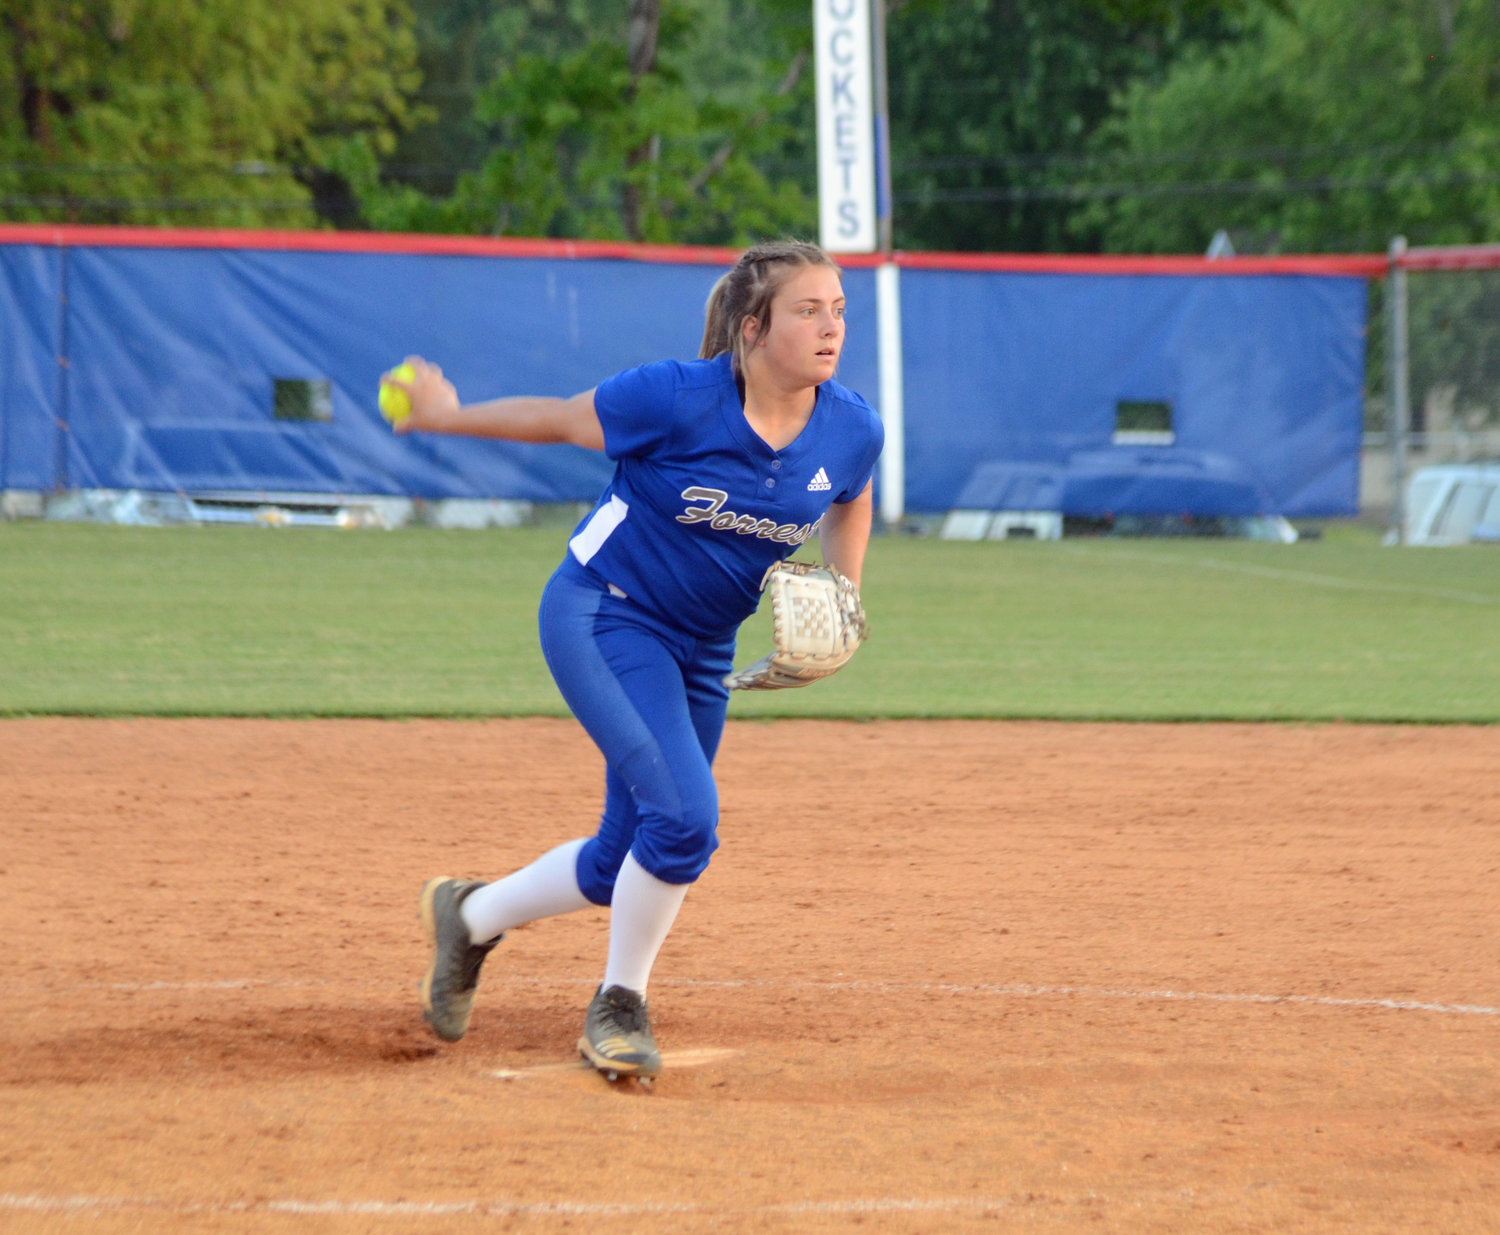 Julie Williams picked up the win in the circle for the Lady Rockets, tossing four shutout innings to end the game.